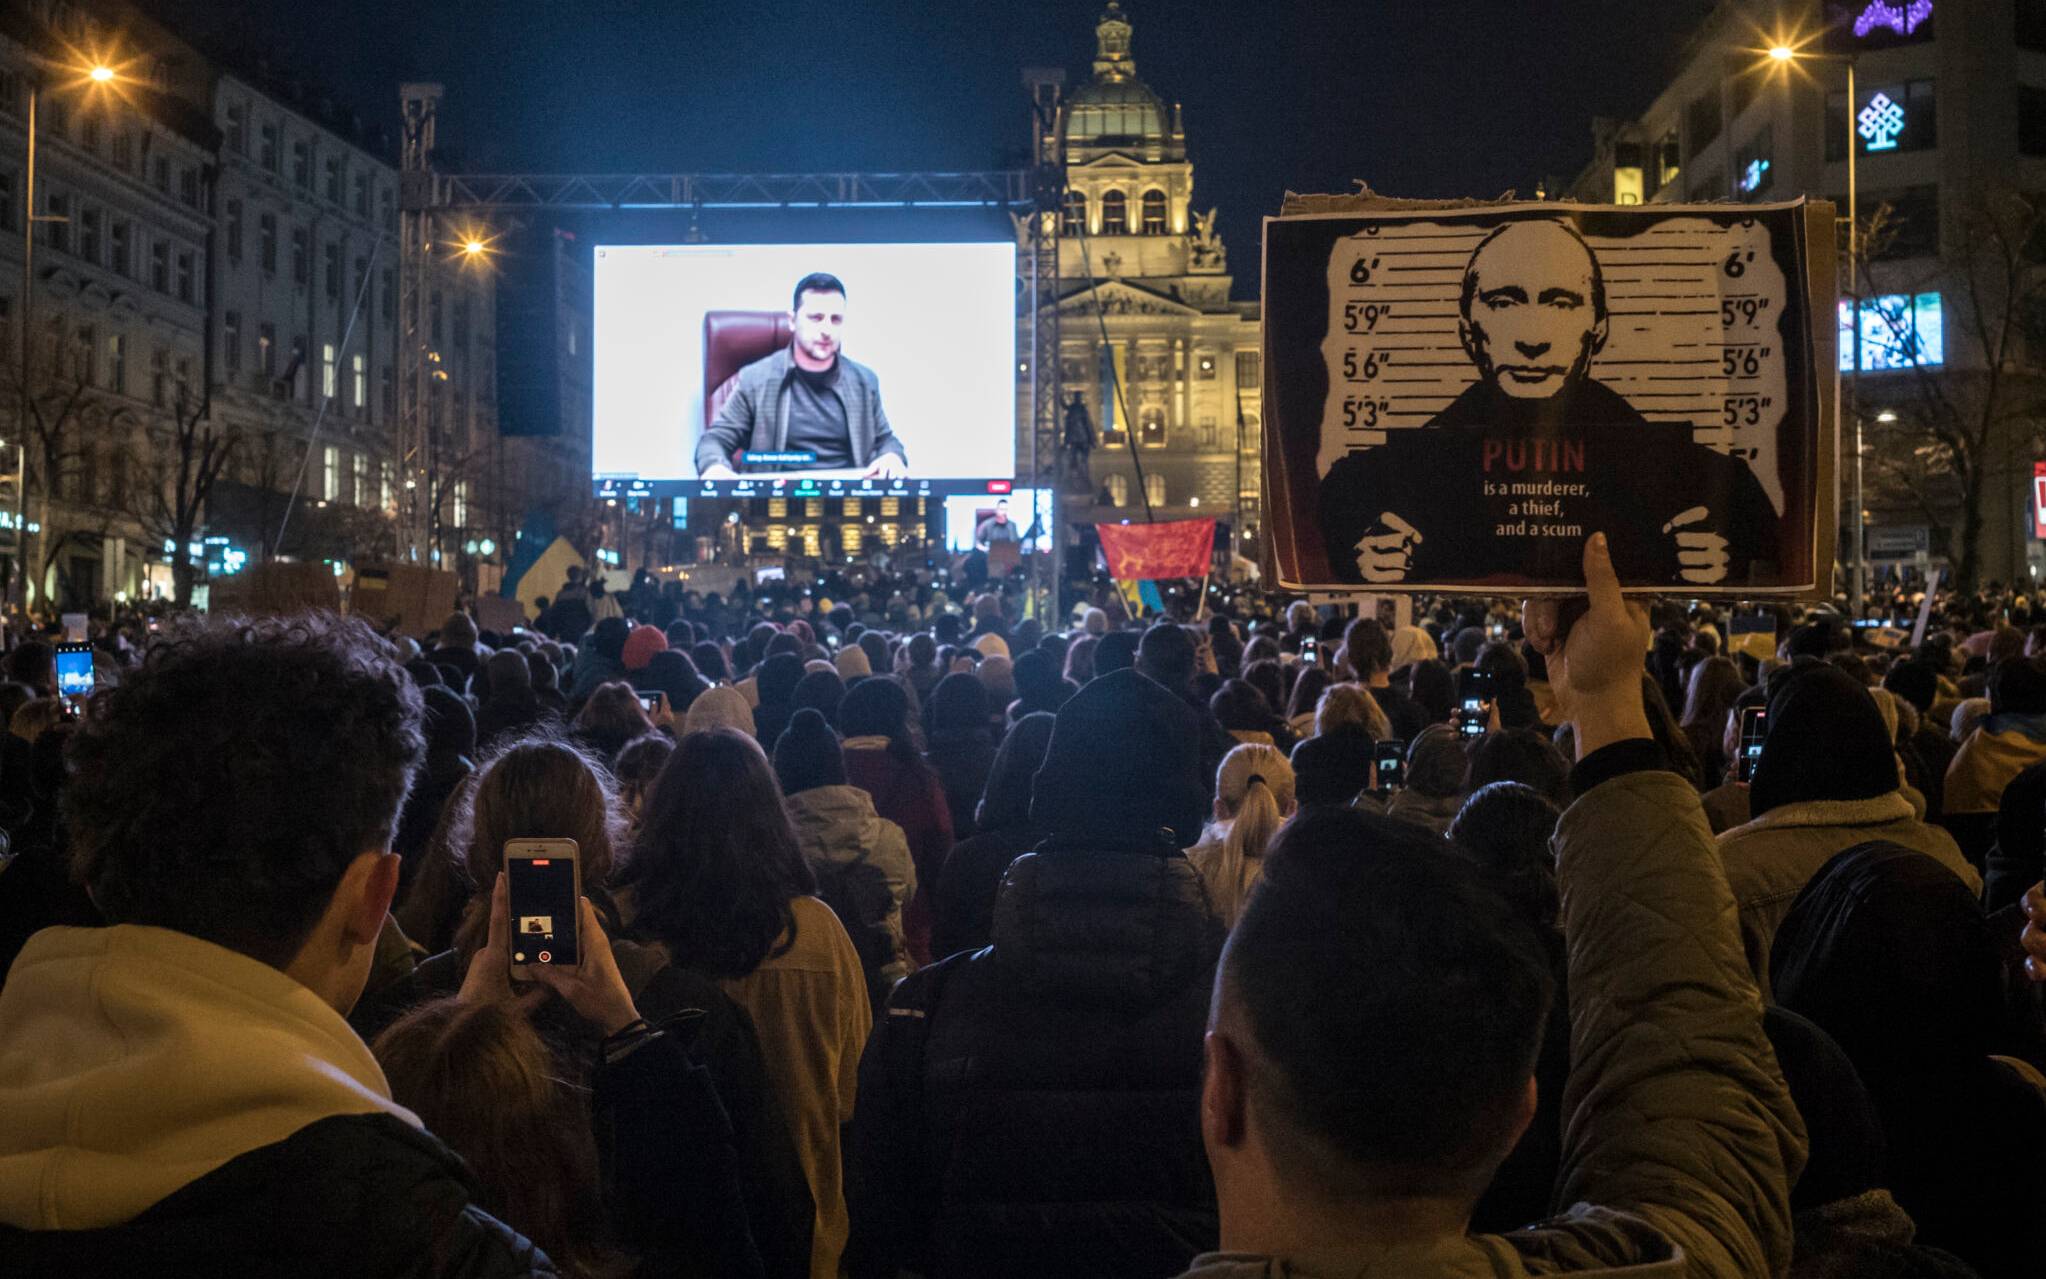 Protestors listen to a speech of Ukrainian President Volodymr Zelensky screened during a demonstration against Russia's invasion of Ukraine, on March 4, 2022 at the Venceslas square in Prague, Czech Republic. (Photo by Michal Cizek / AFP)